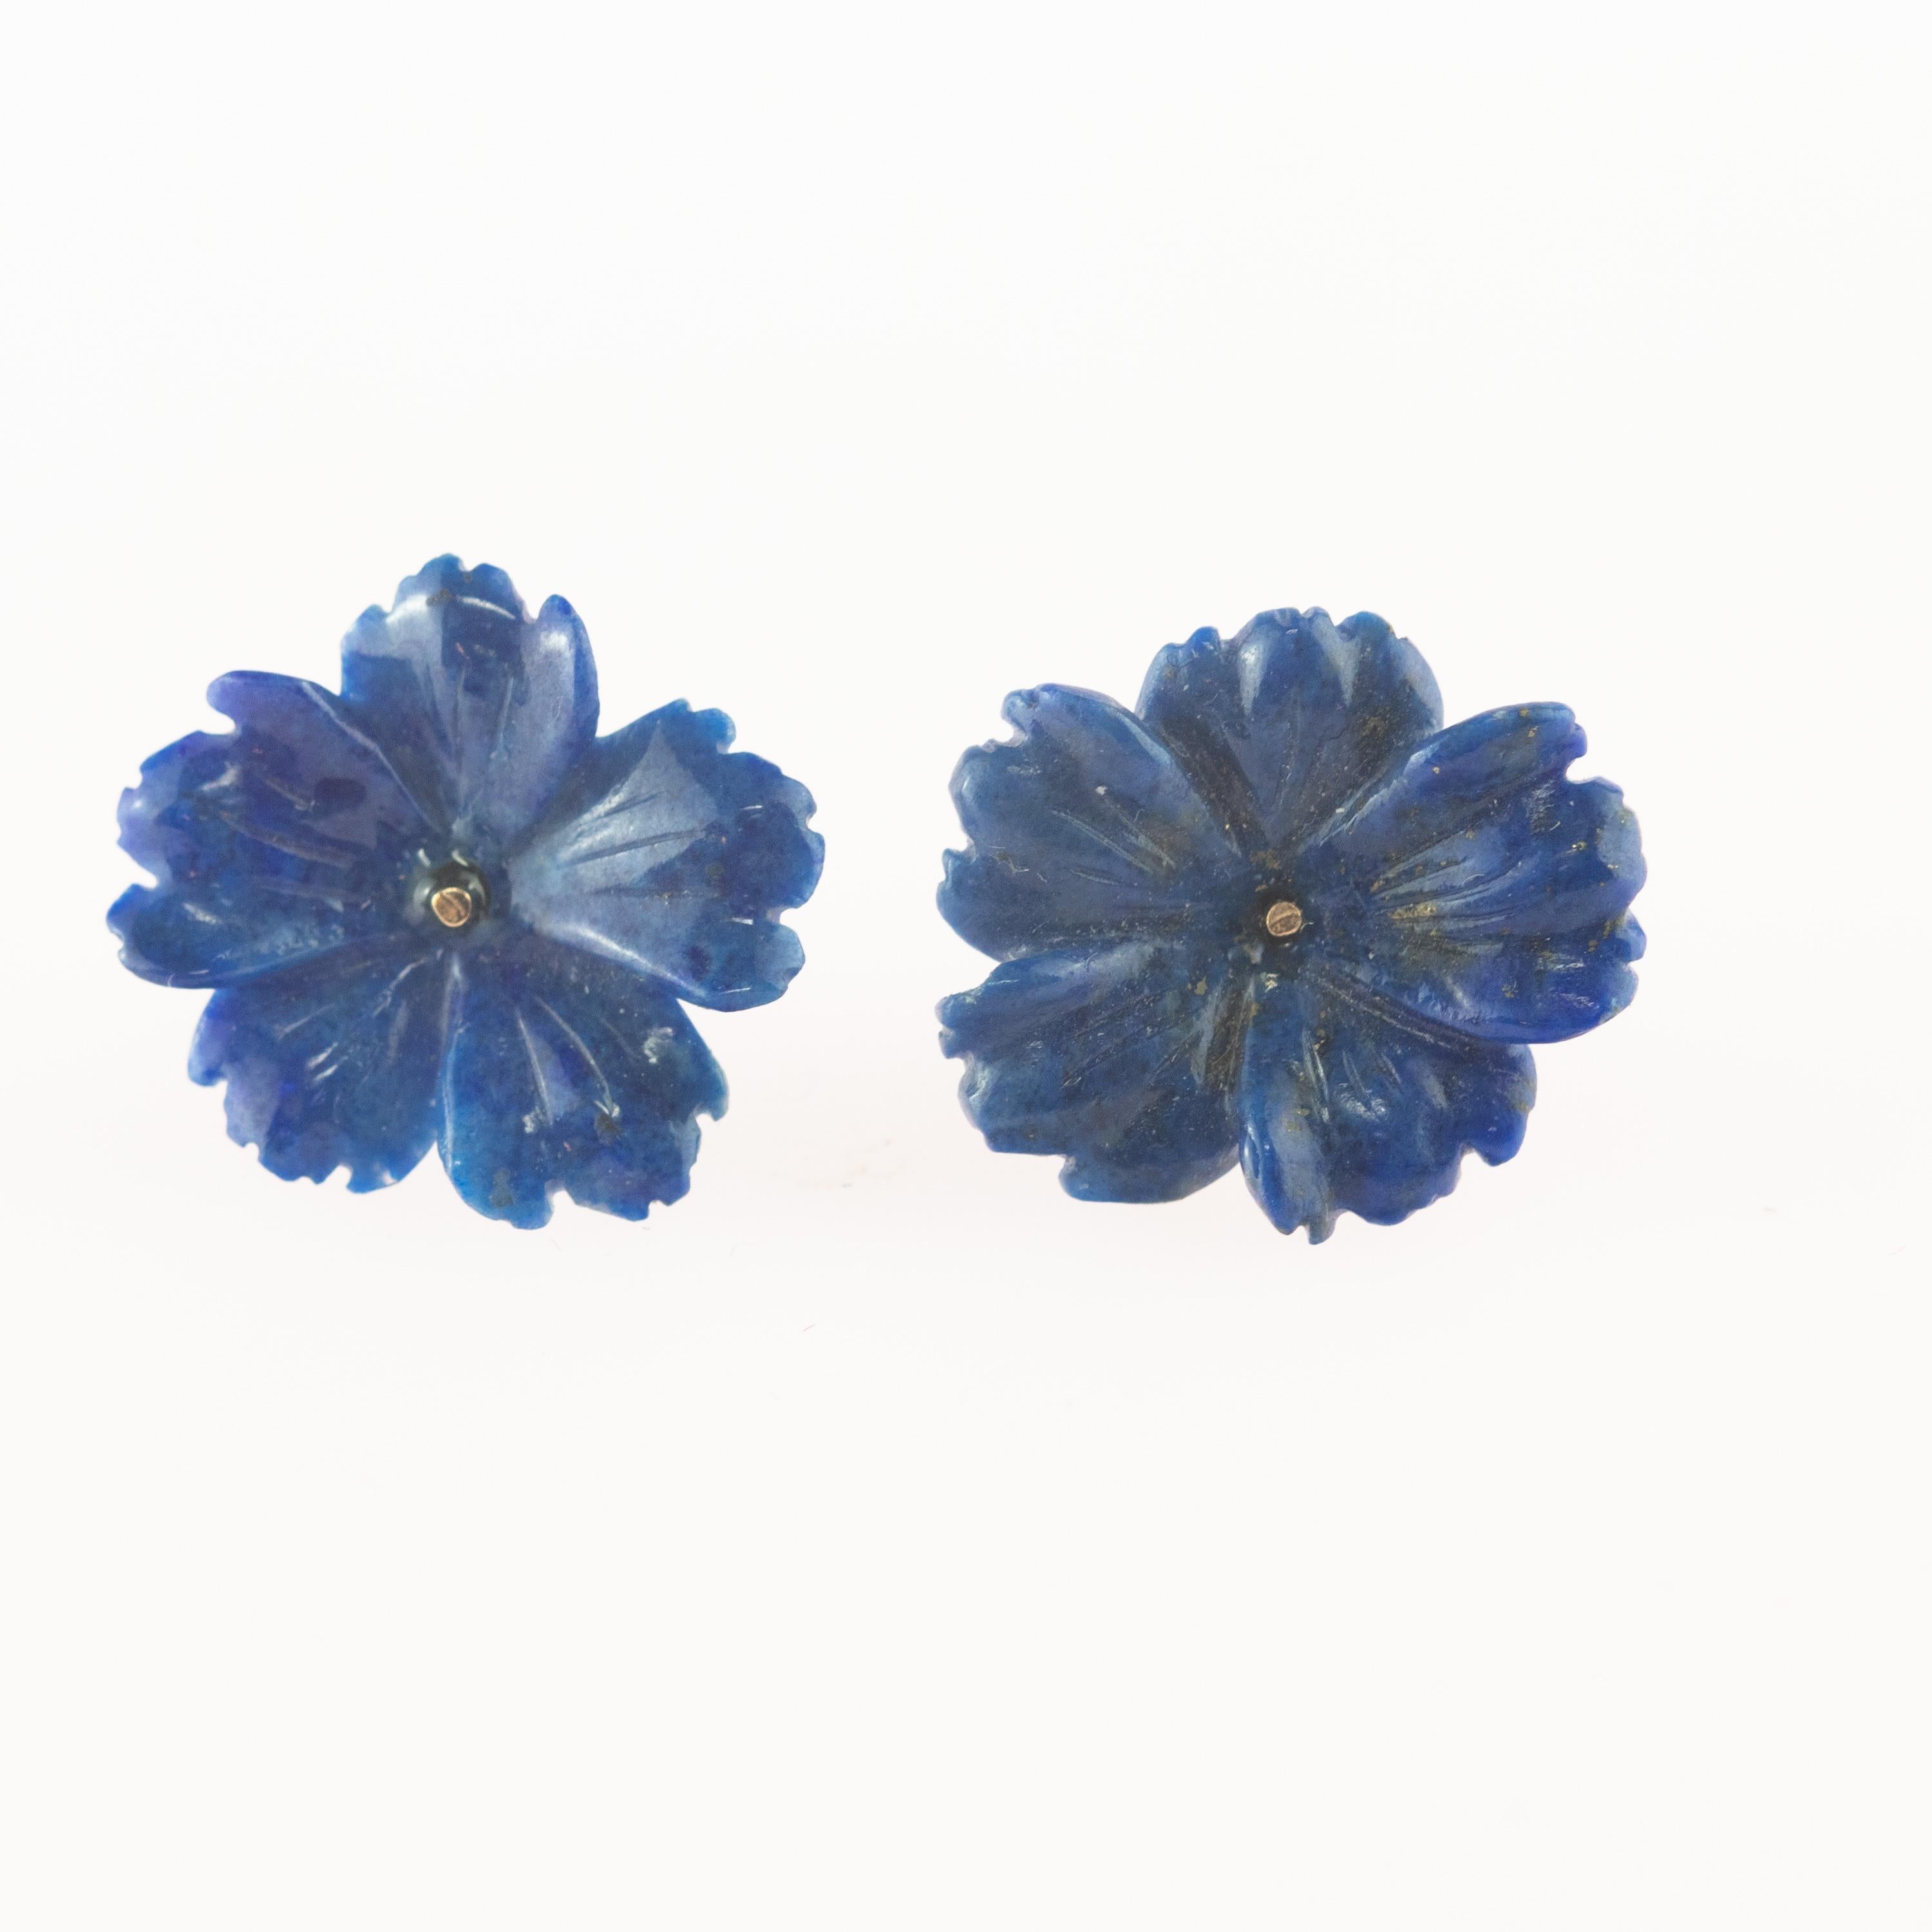 Splendid lapis lazuli earrings, inspired by the beauties of the Natural World. A floreal design for wonderful precious stones carvings.

Beautiful and delicate design that evokes the roots of beauty that are gradually woven to achieve a harmonious